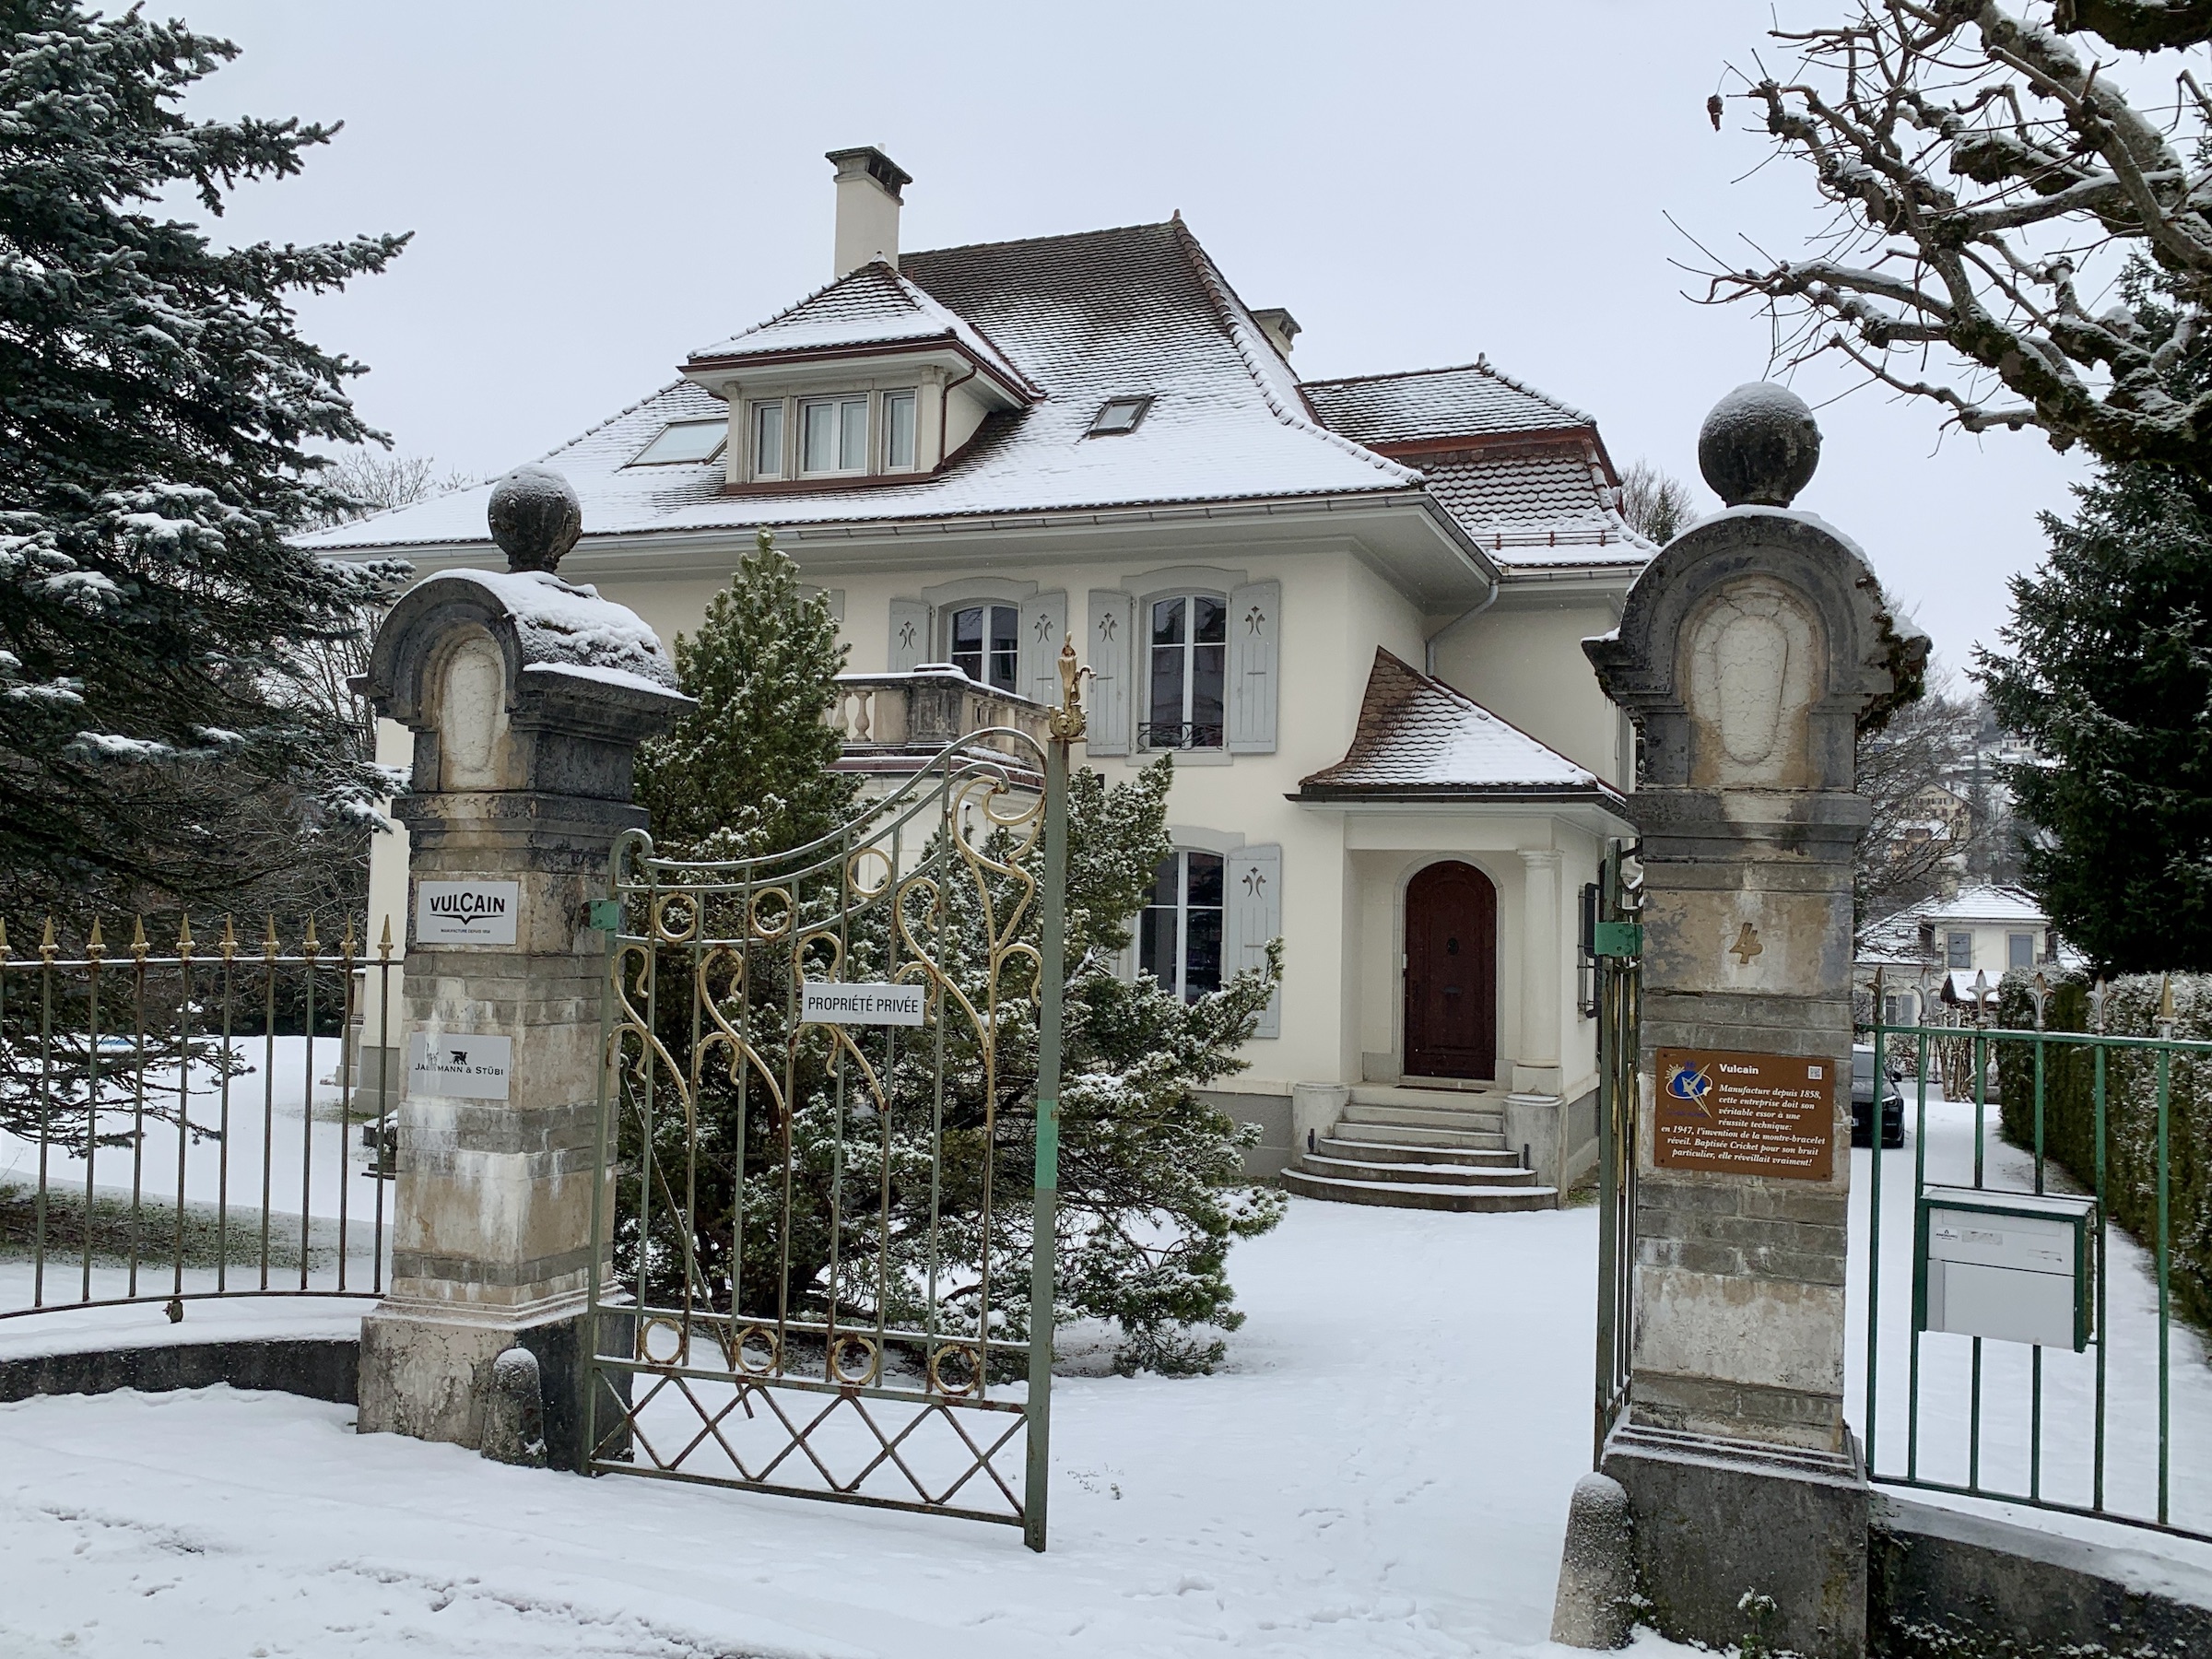 Building of the watch brand Vulcain in Le Locle